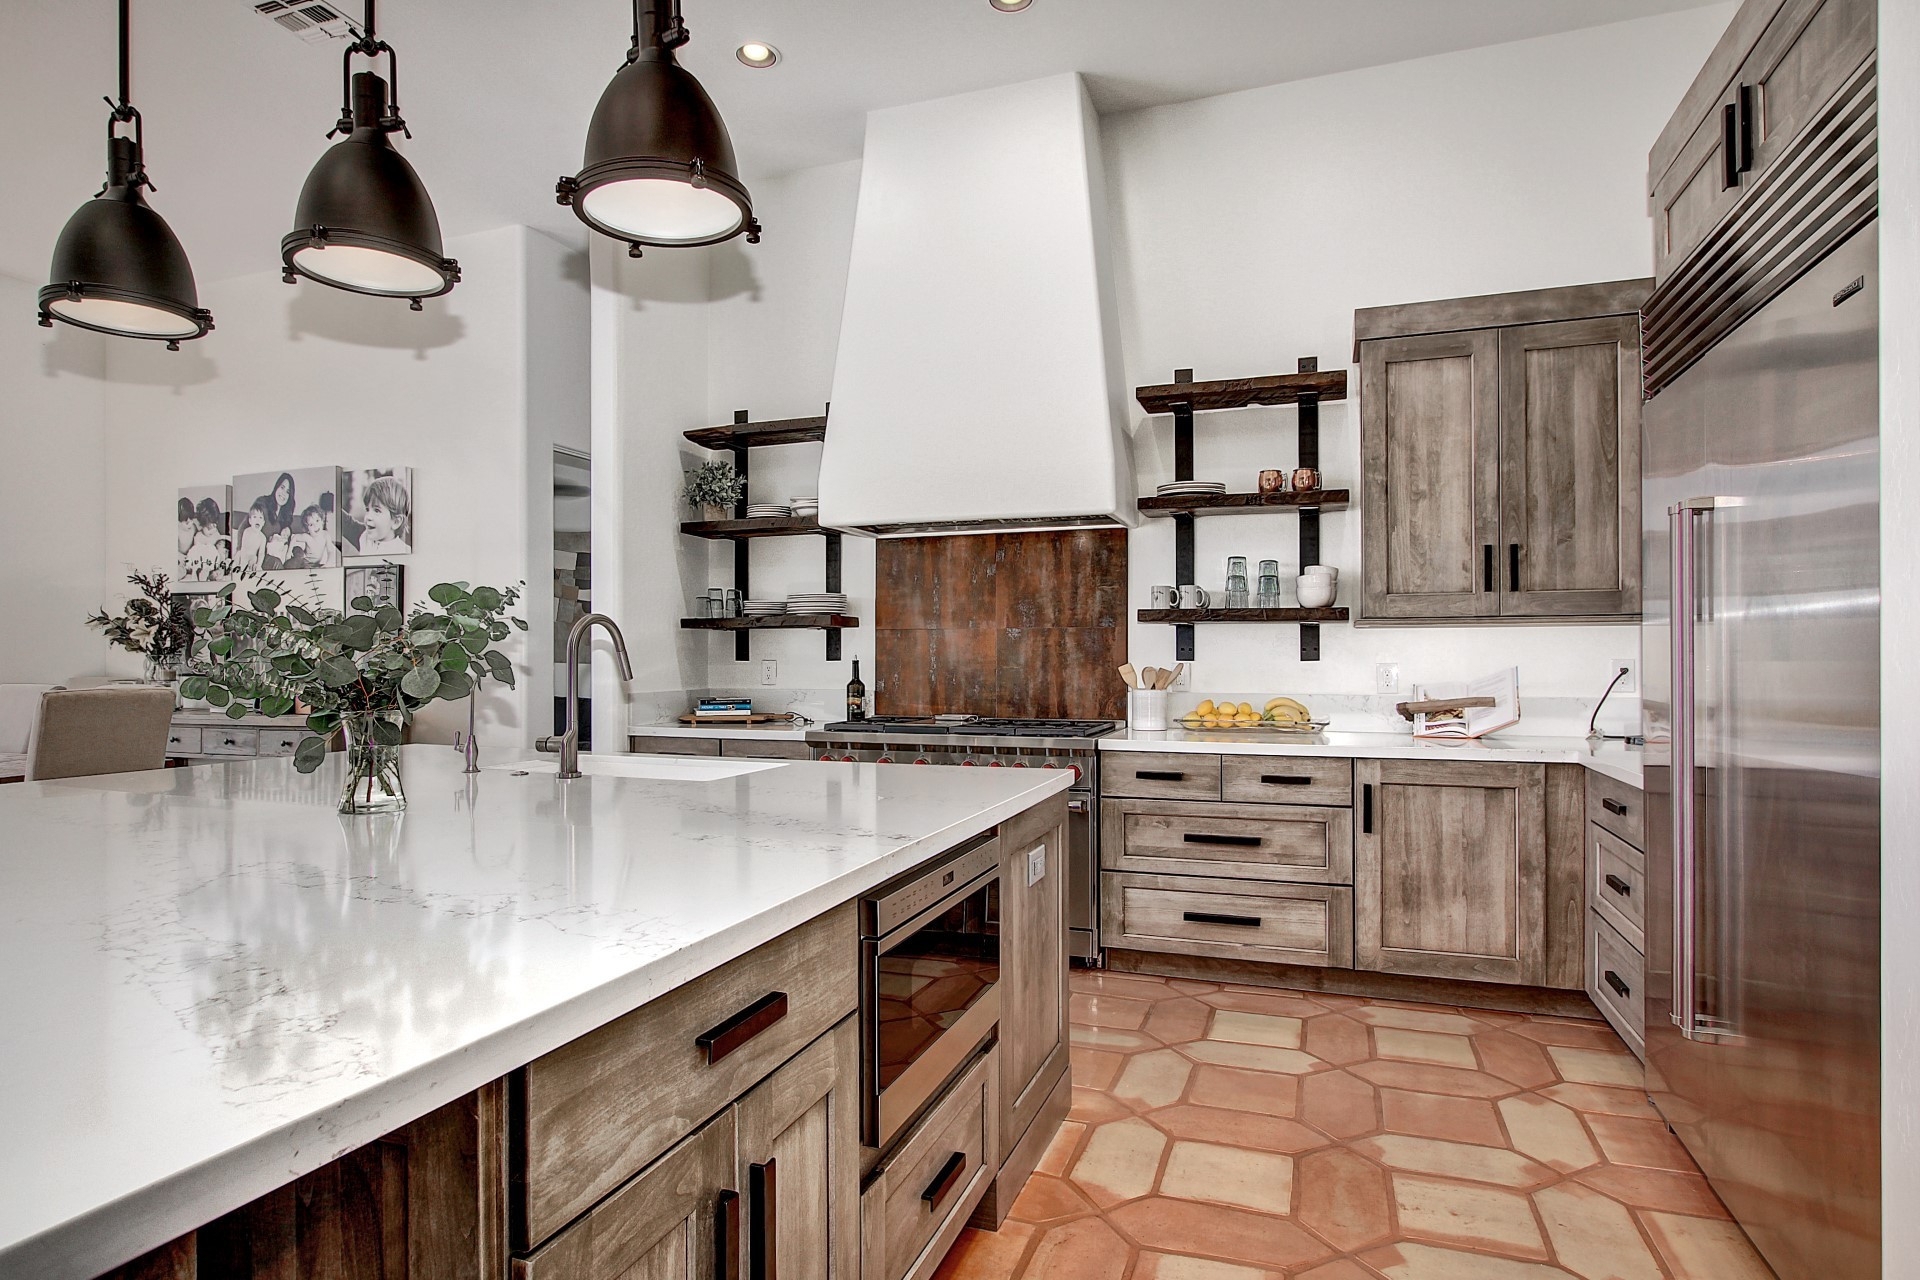 15 Outstanding Industrial Kitchens